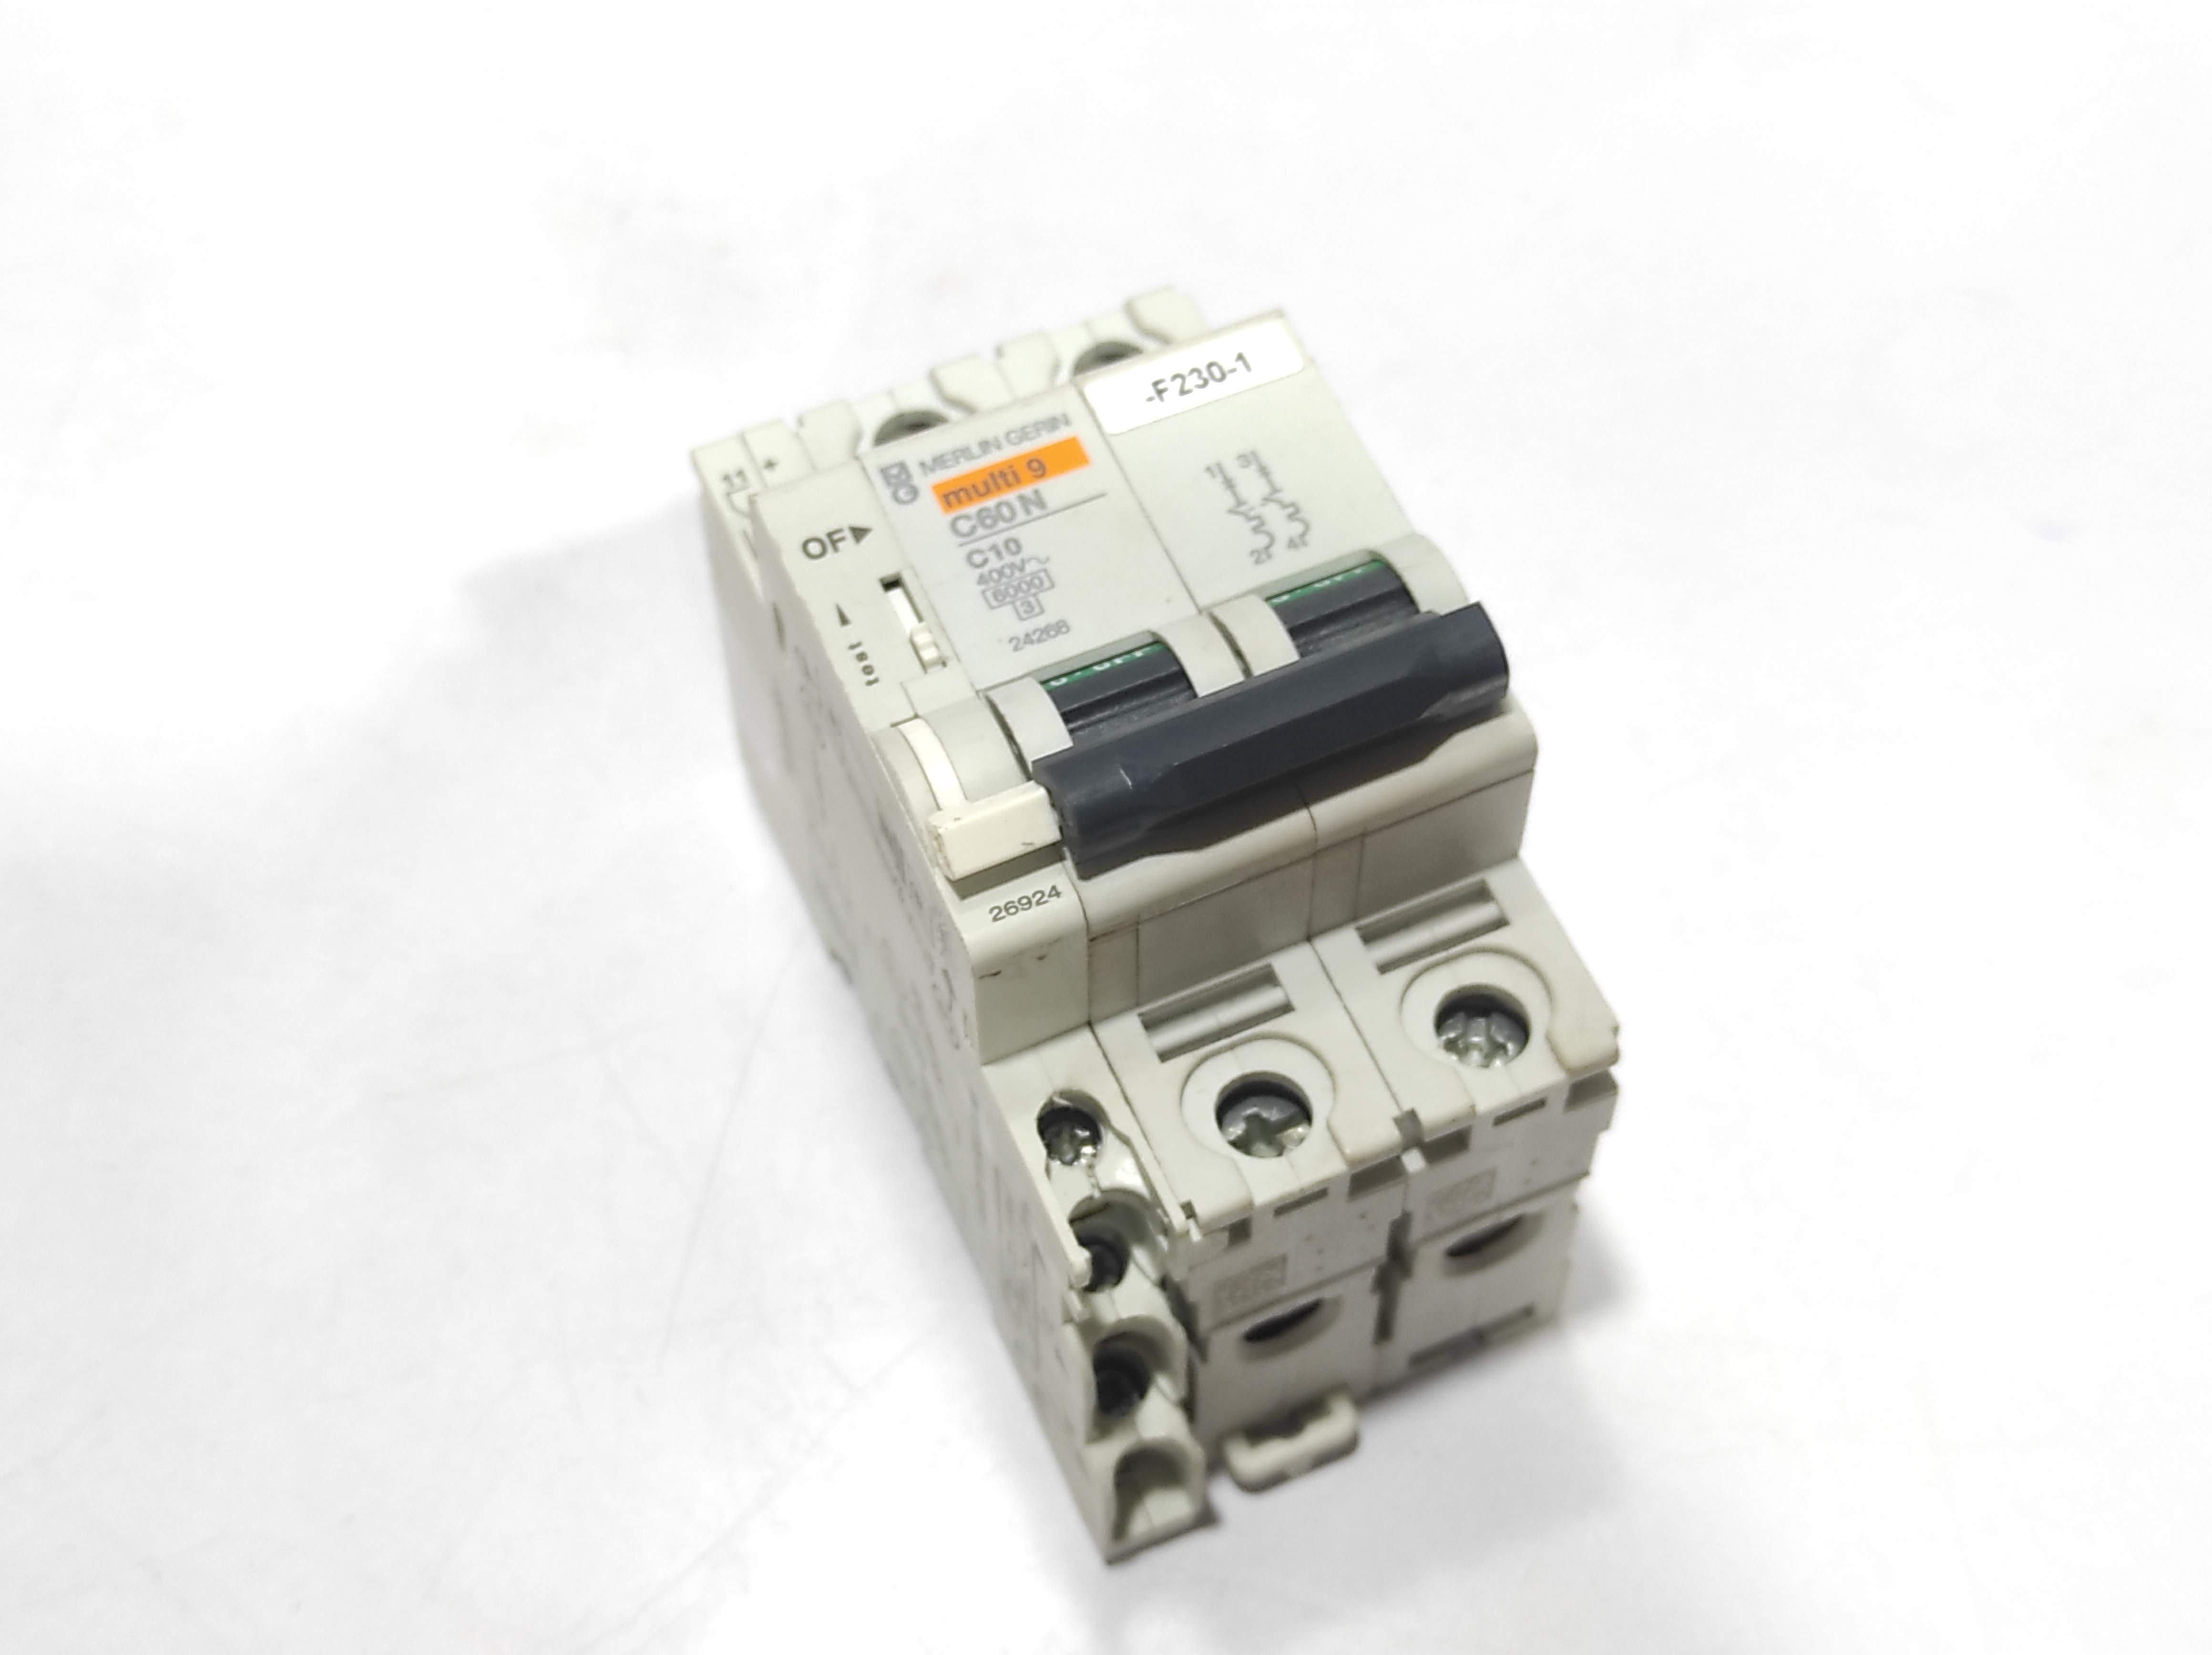 Merlin Gerin Multi 9 C60N C10 Circuit Breaker With Schneider 26924 Auxiliary Contact Block